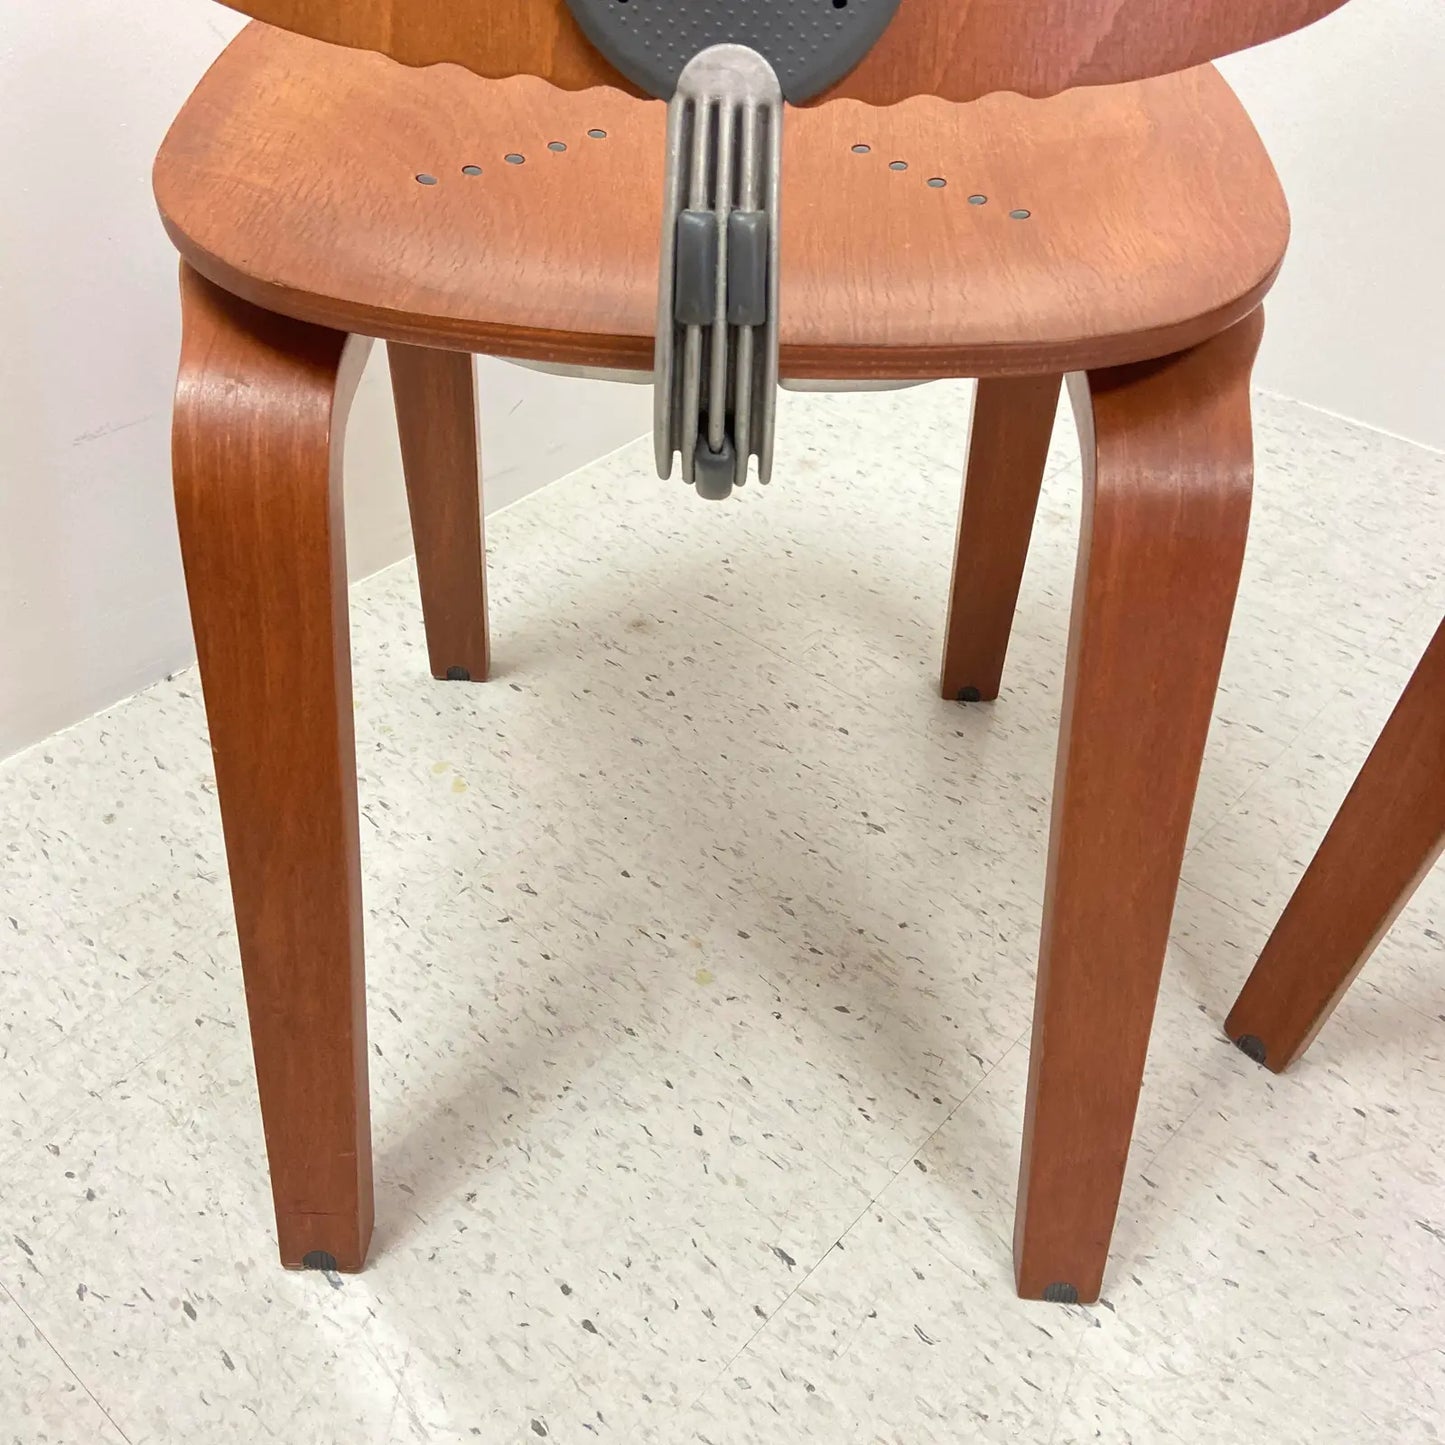 GIANCARLO PIRETTI BENTWOOD CYLON CHAIRS FOR KREUGER - A PAIR